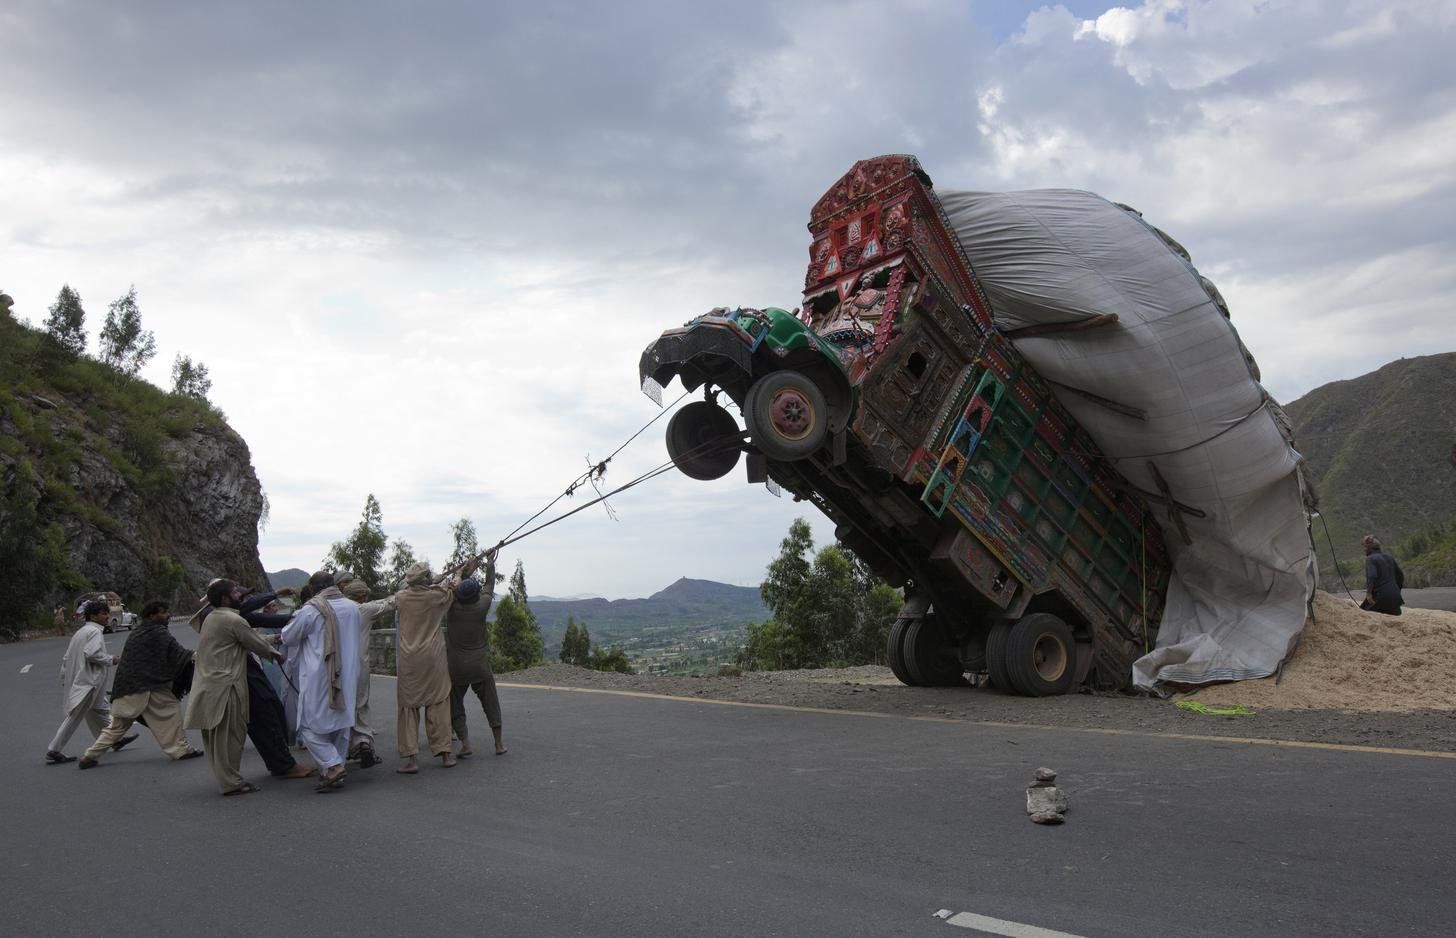 Pakistani bus being poached for its horn